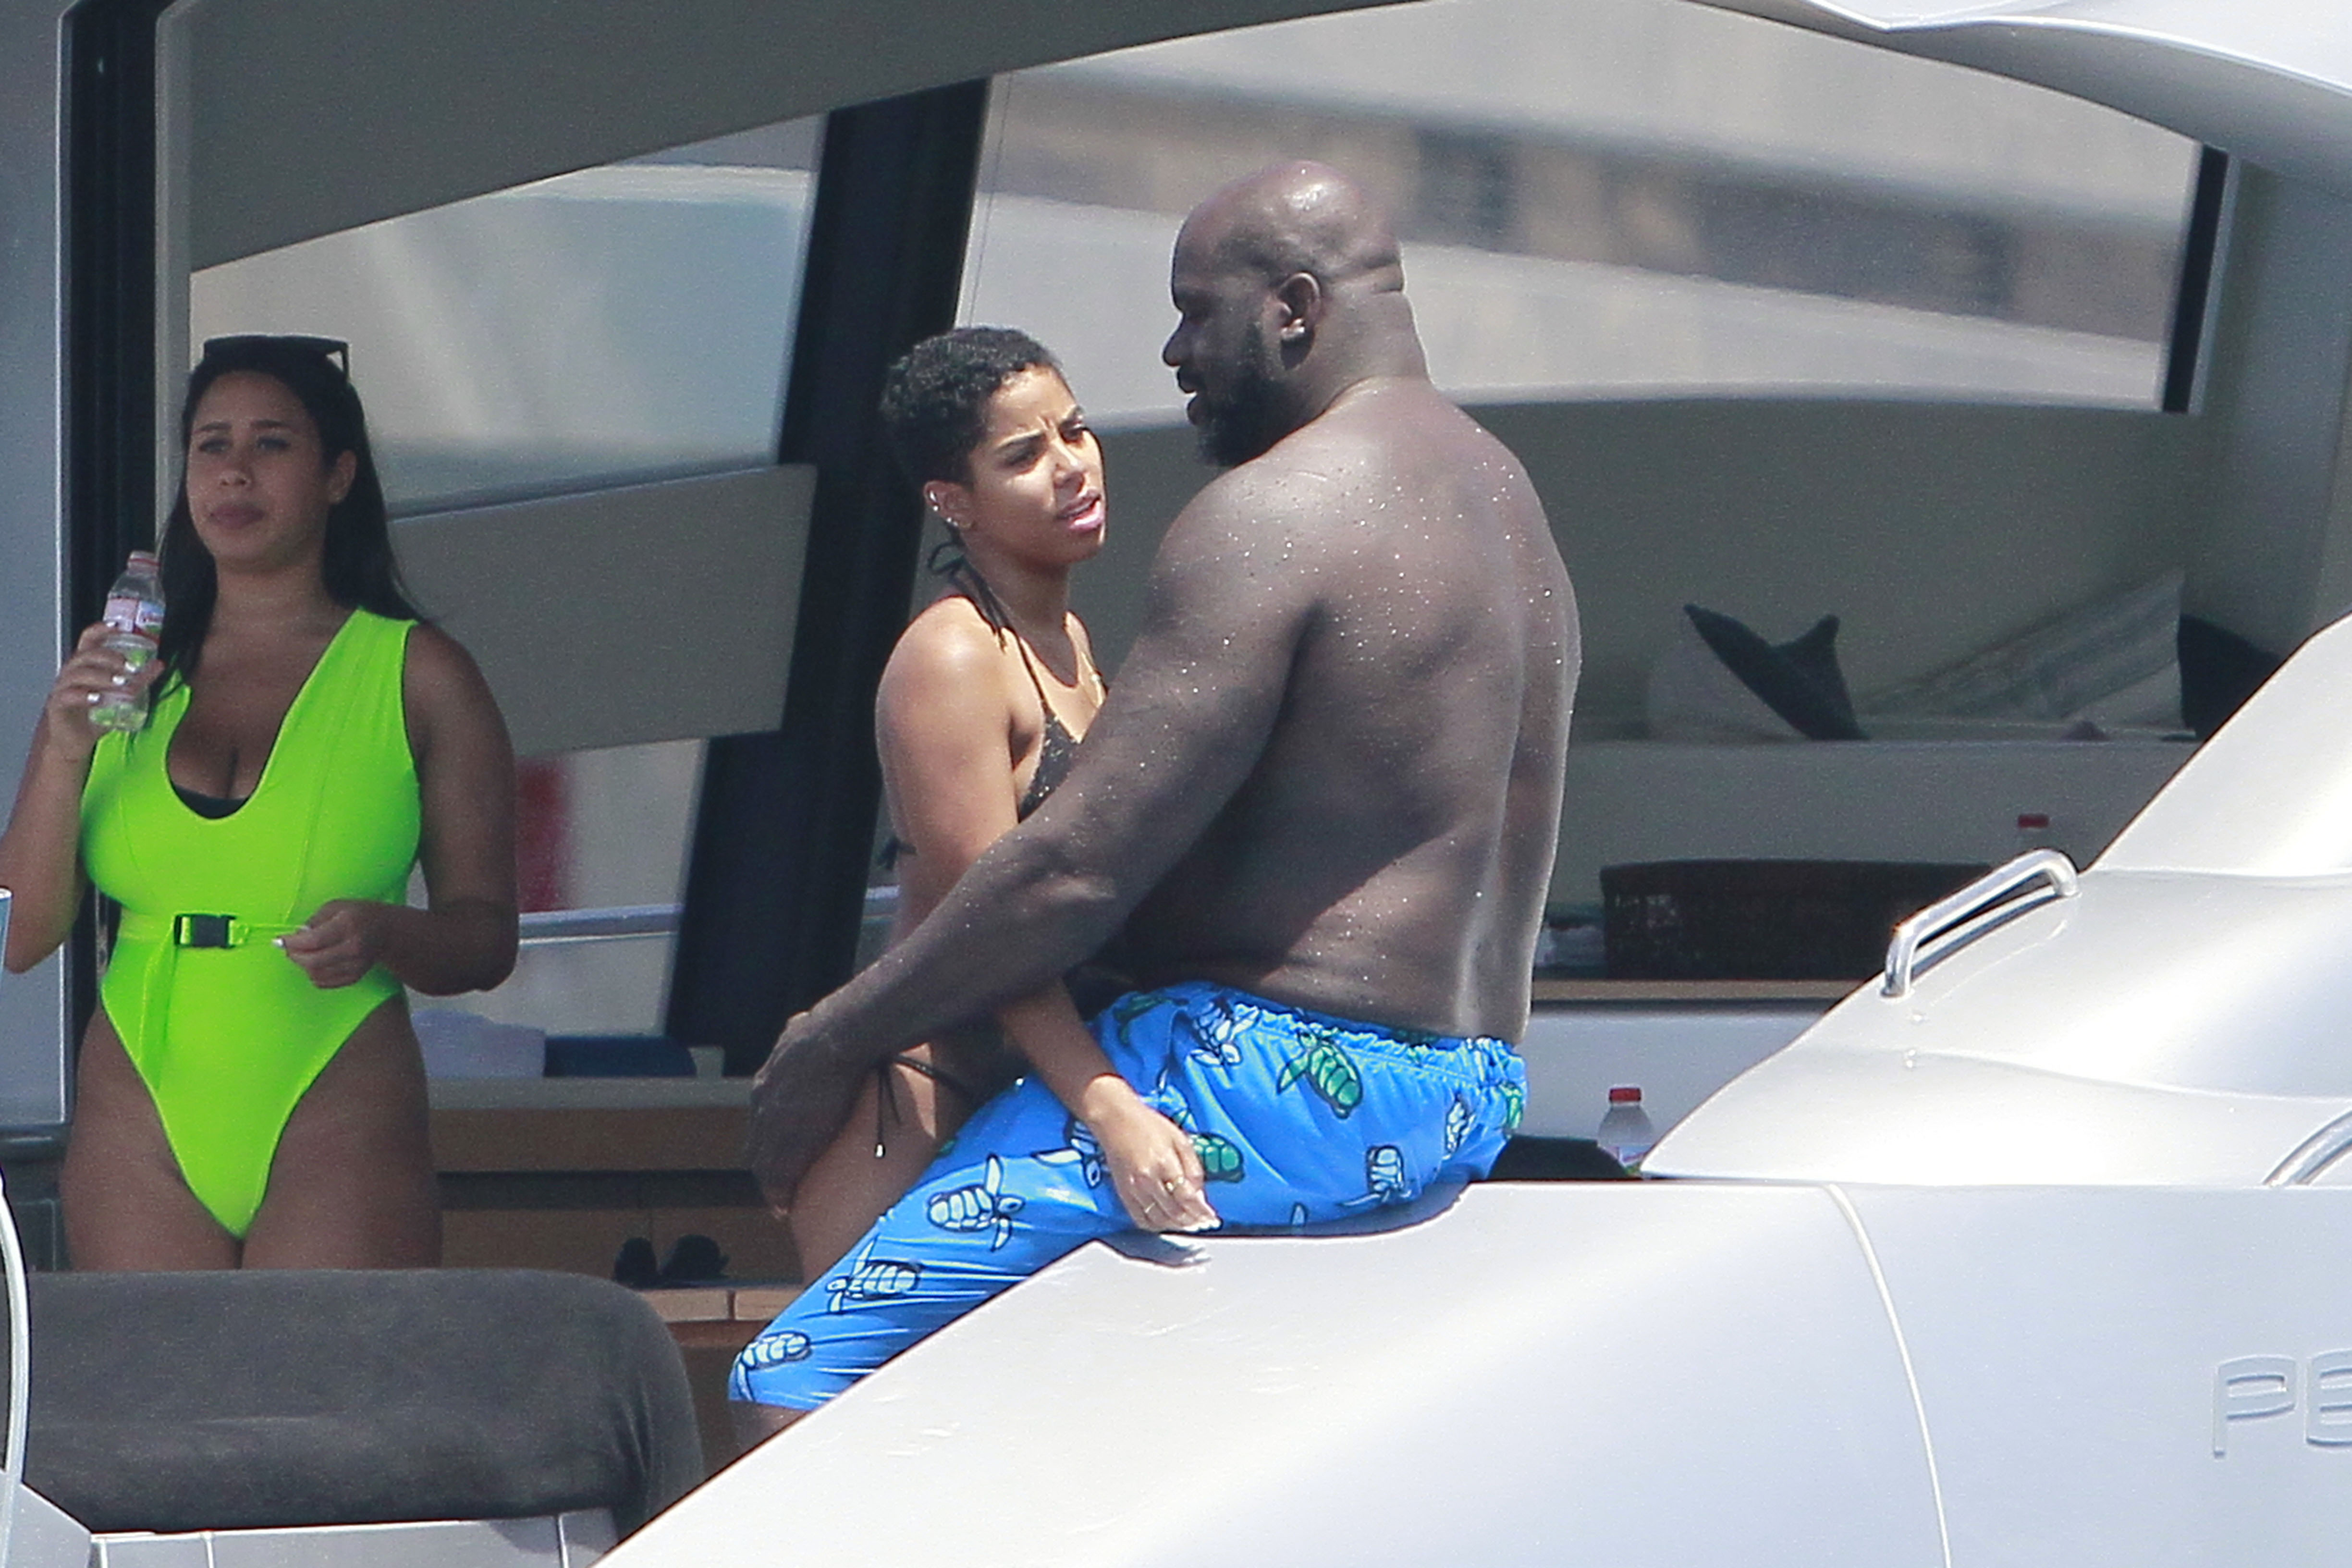 I actually have footage of me in a pink thong': Shaquille O'Neal